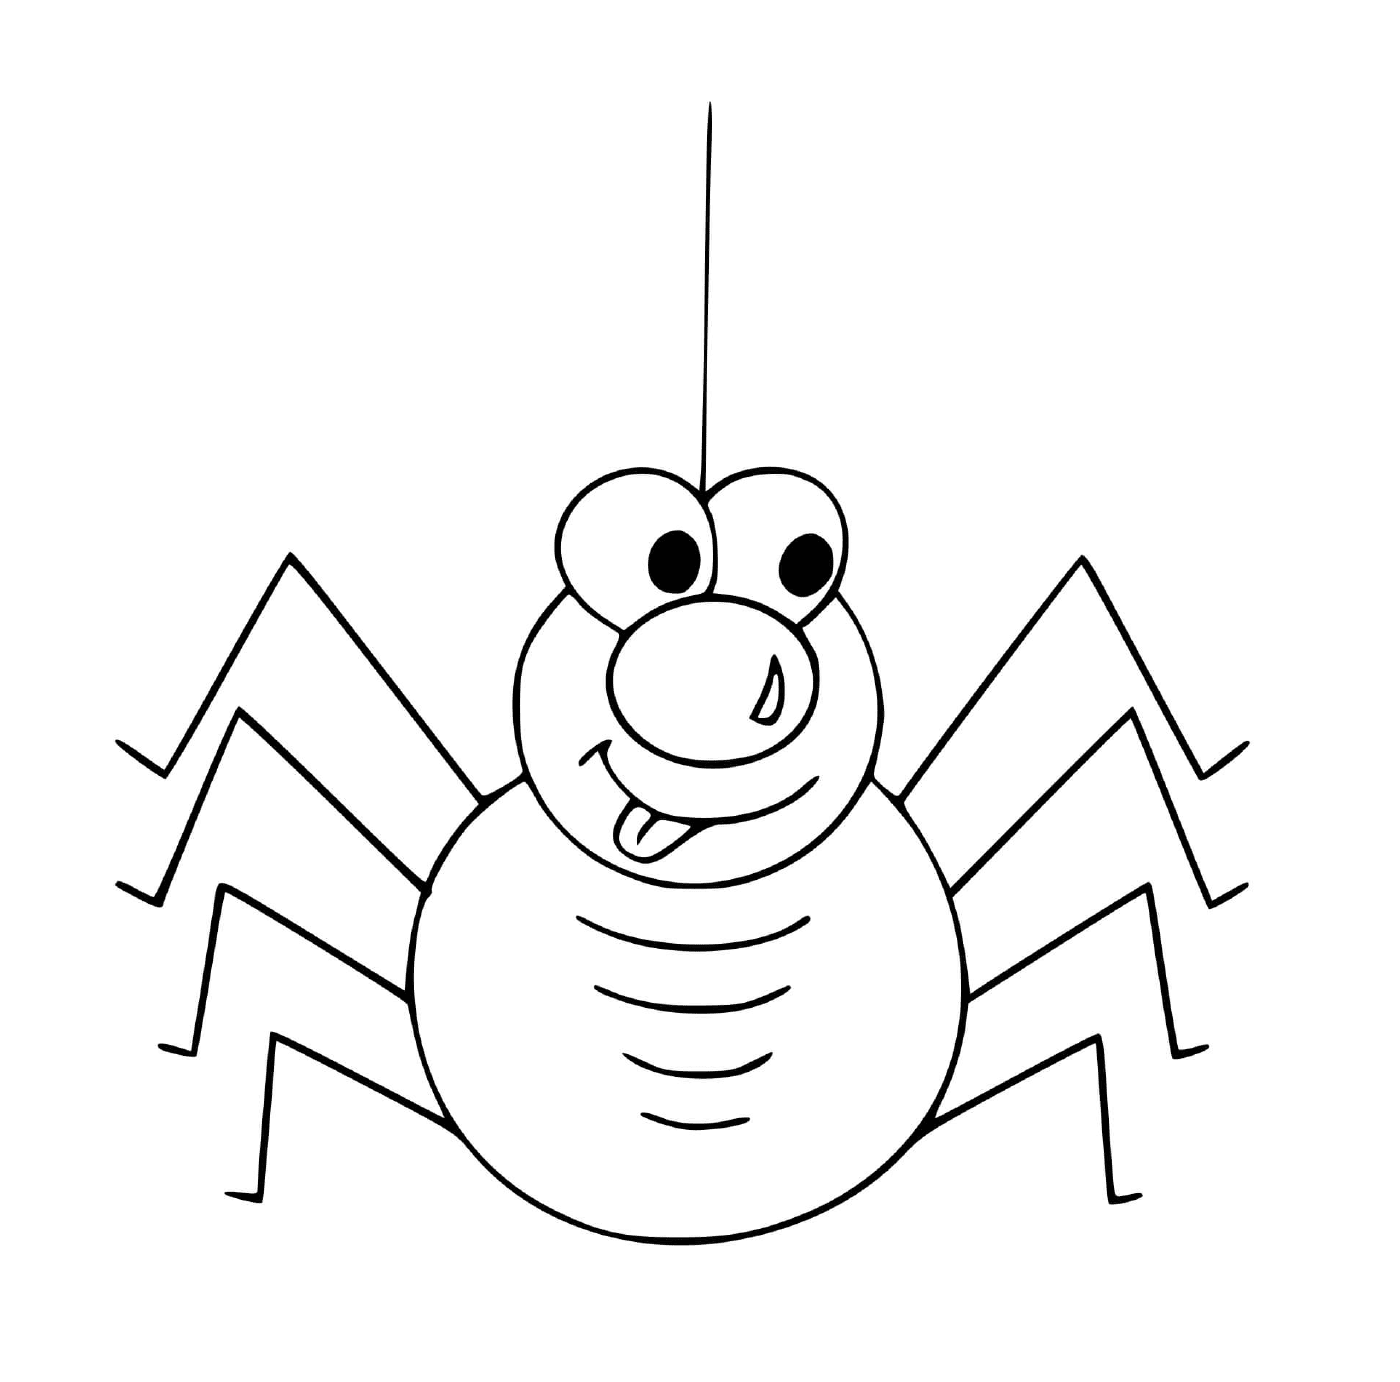  A smiling spider 